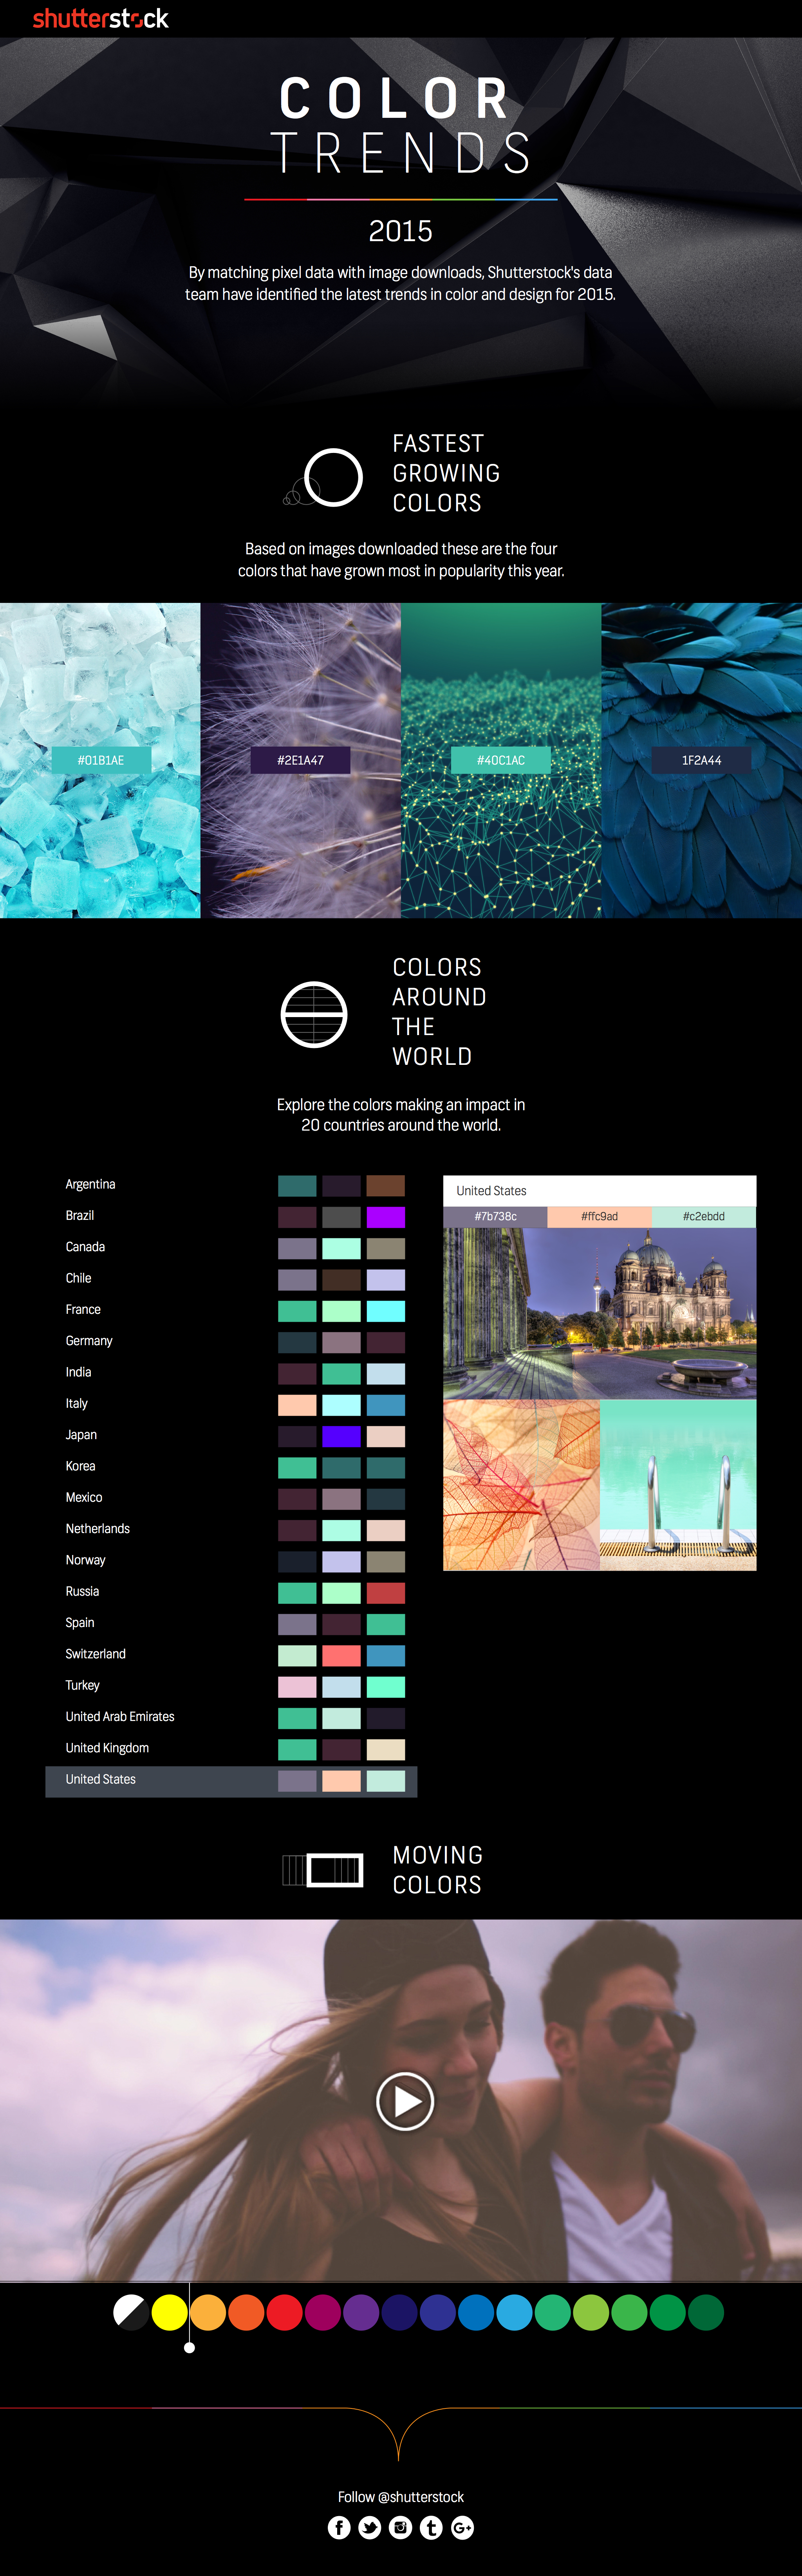 Color Trends of 2015 infographic